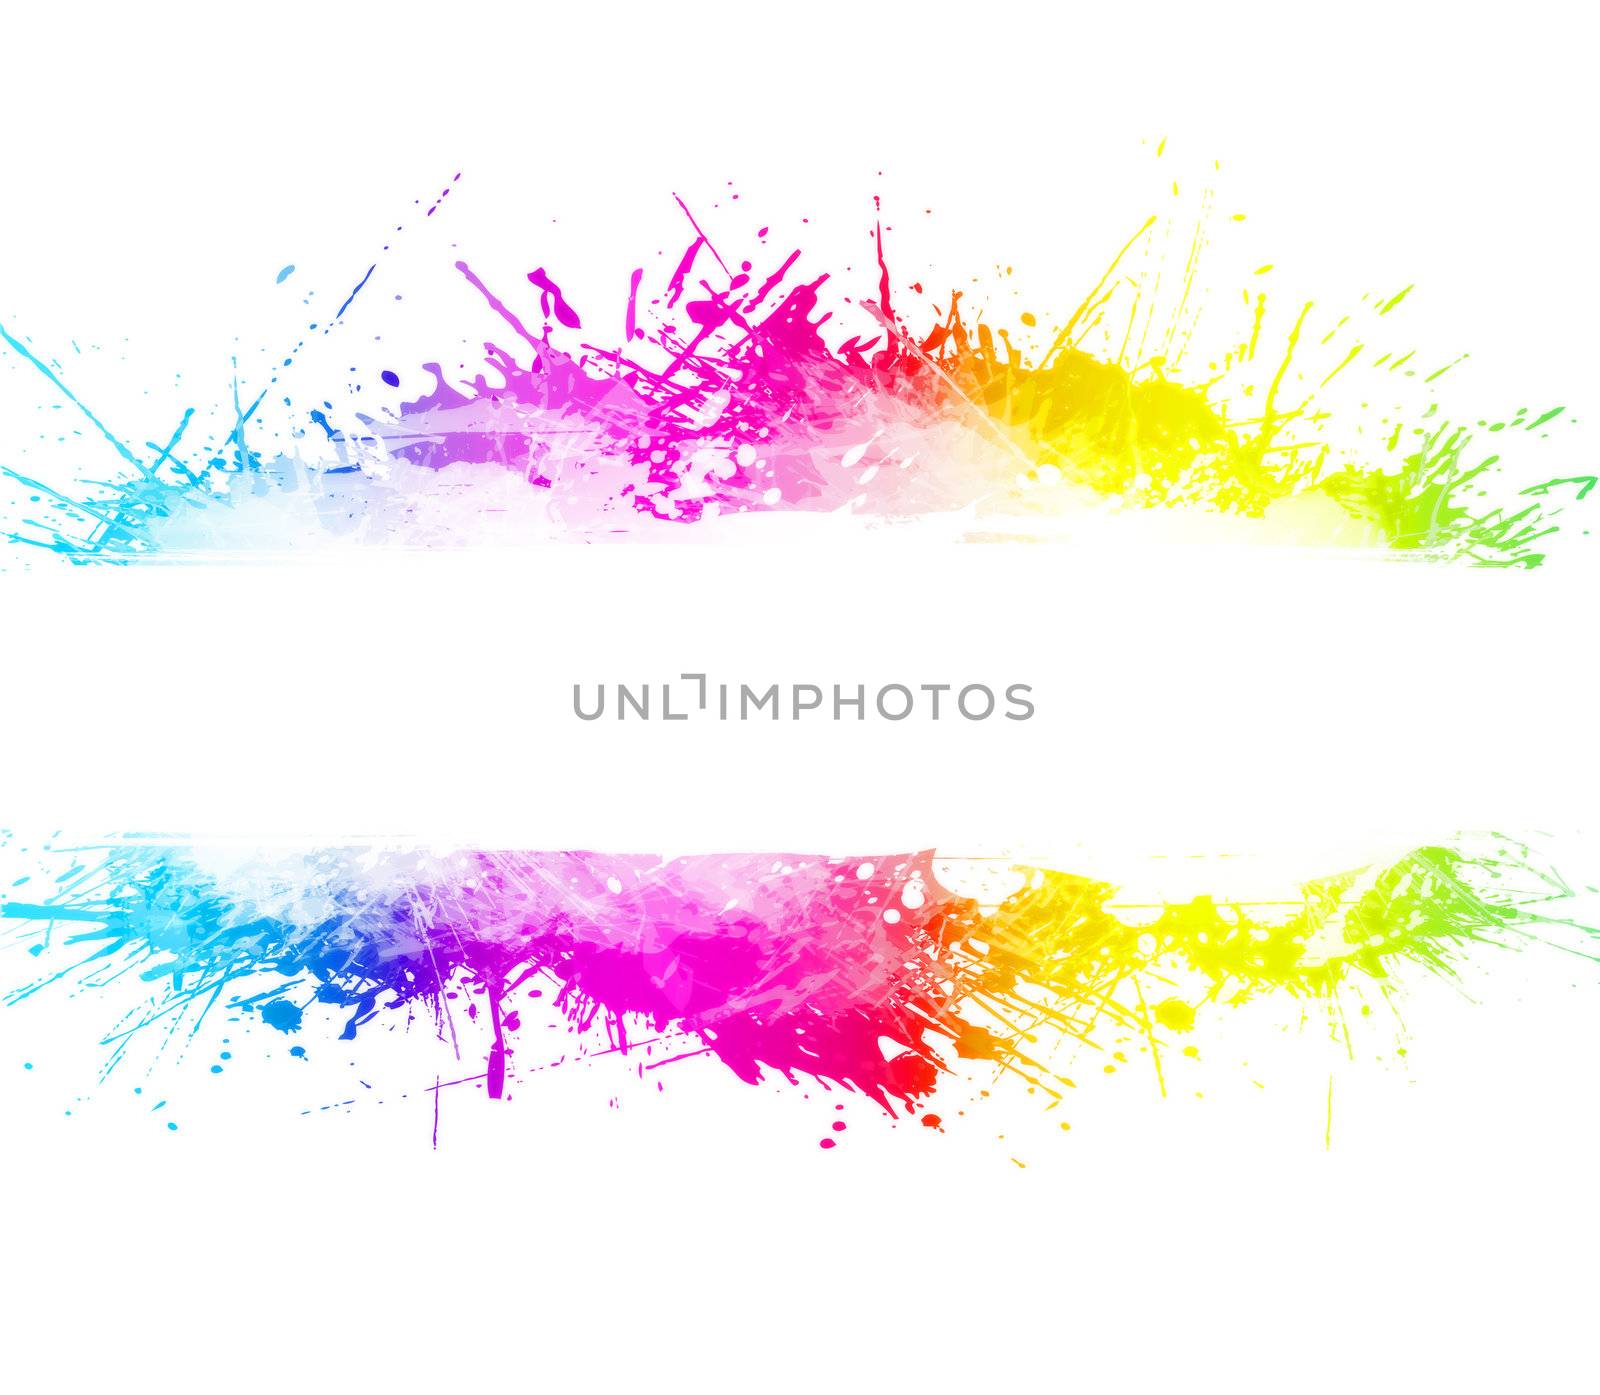 Rainbow washed watercolor splatter background by domencolja